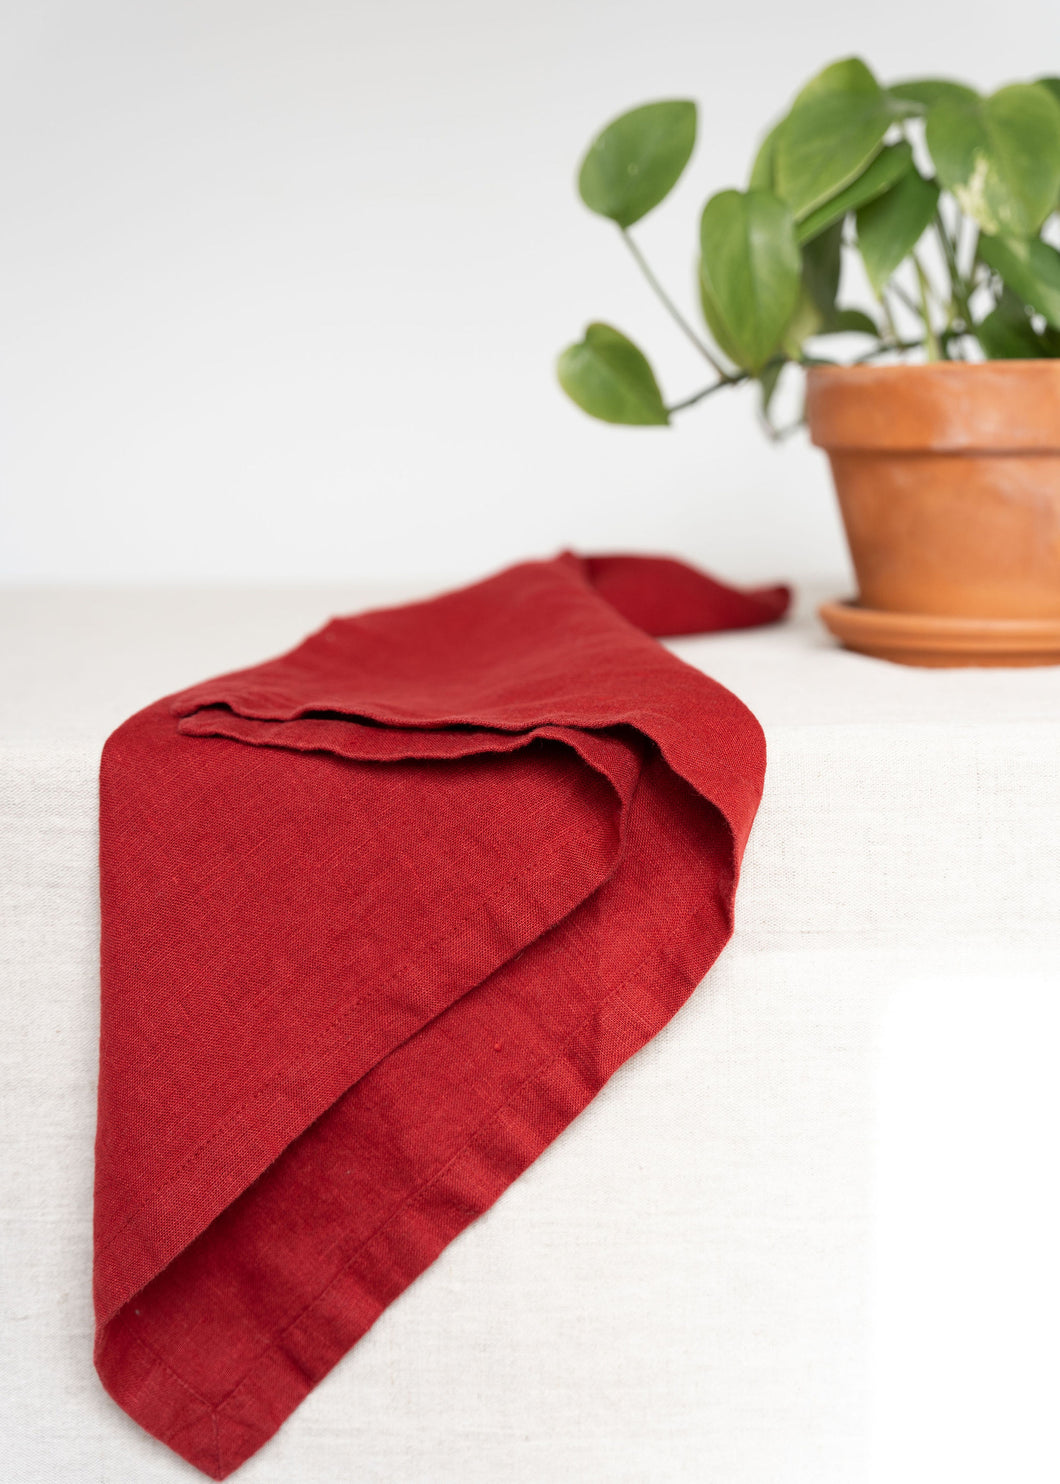 100% Linen Classic Napkins in Vintage Red - Set of 4